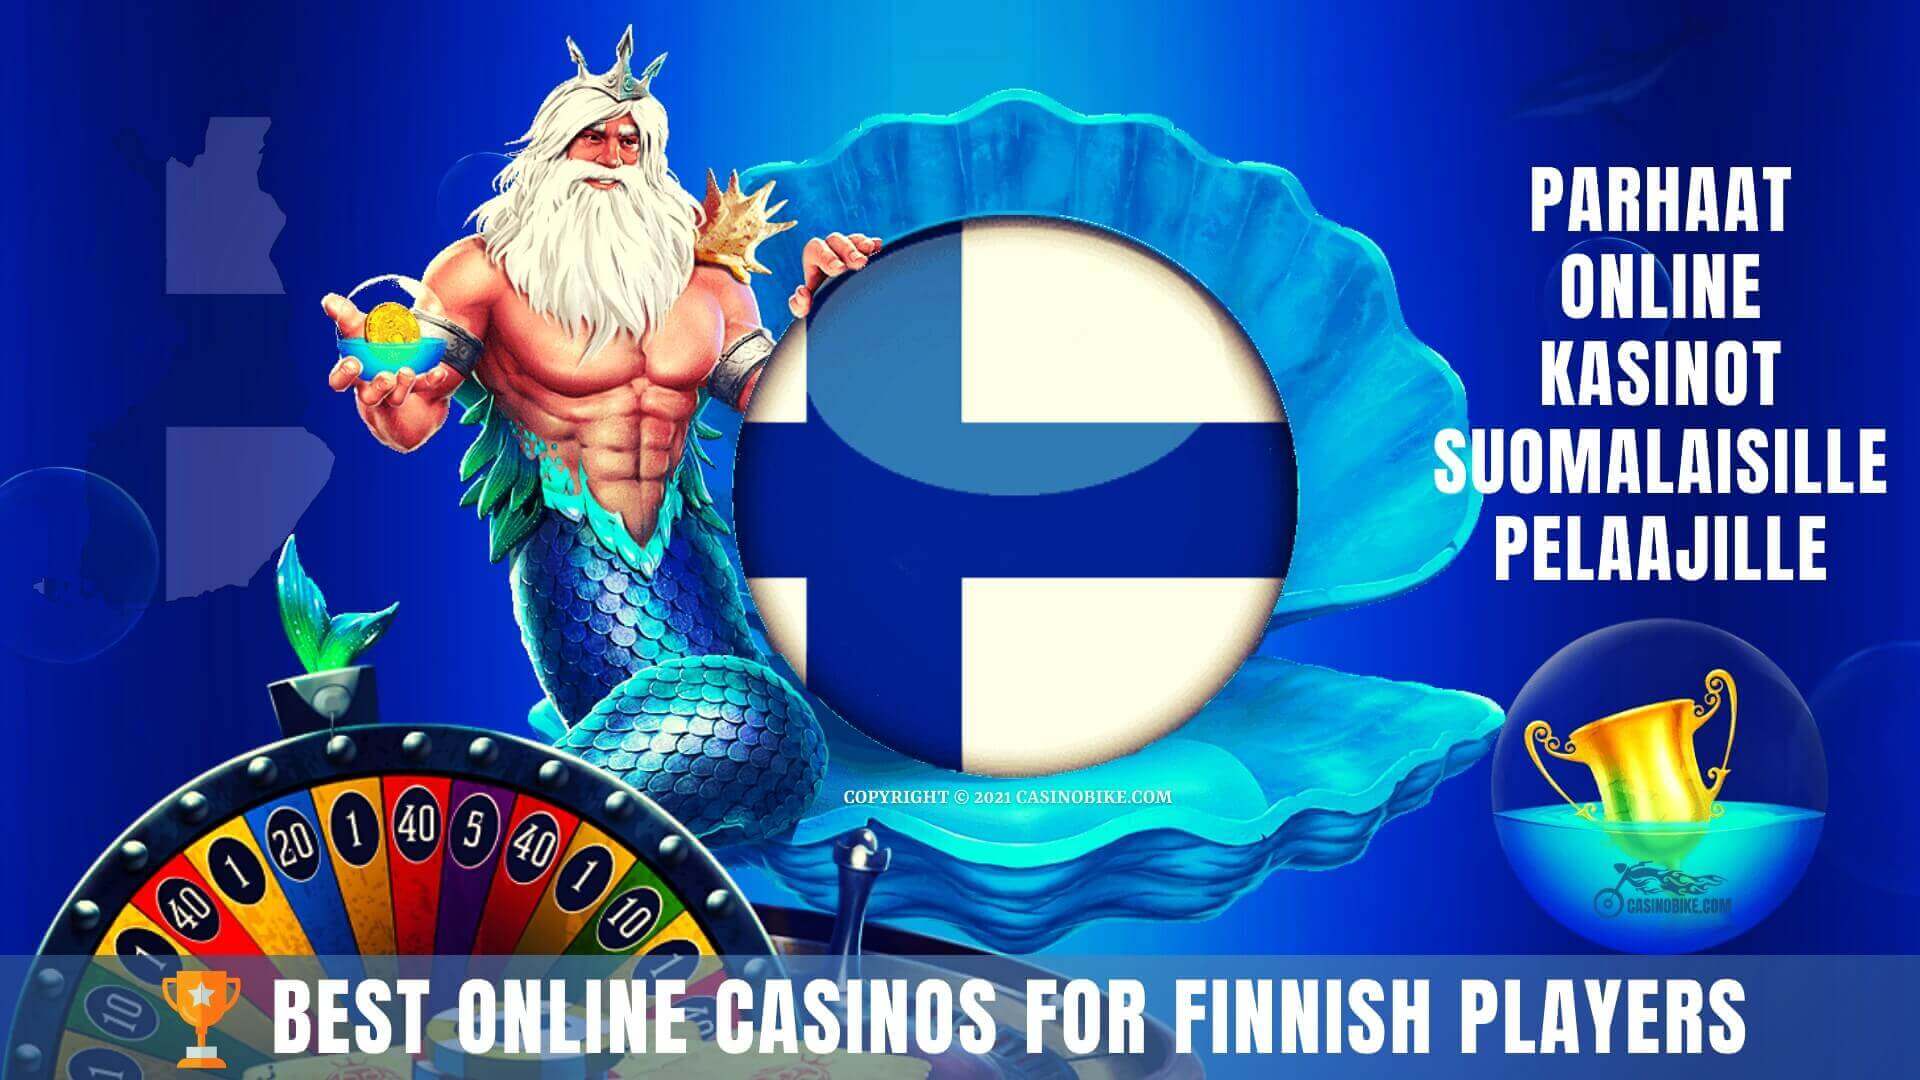 Best Online Casinos for Finnish Players